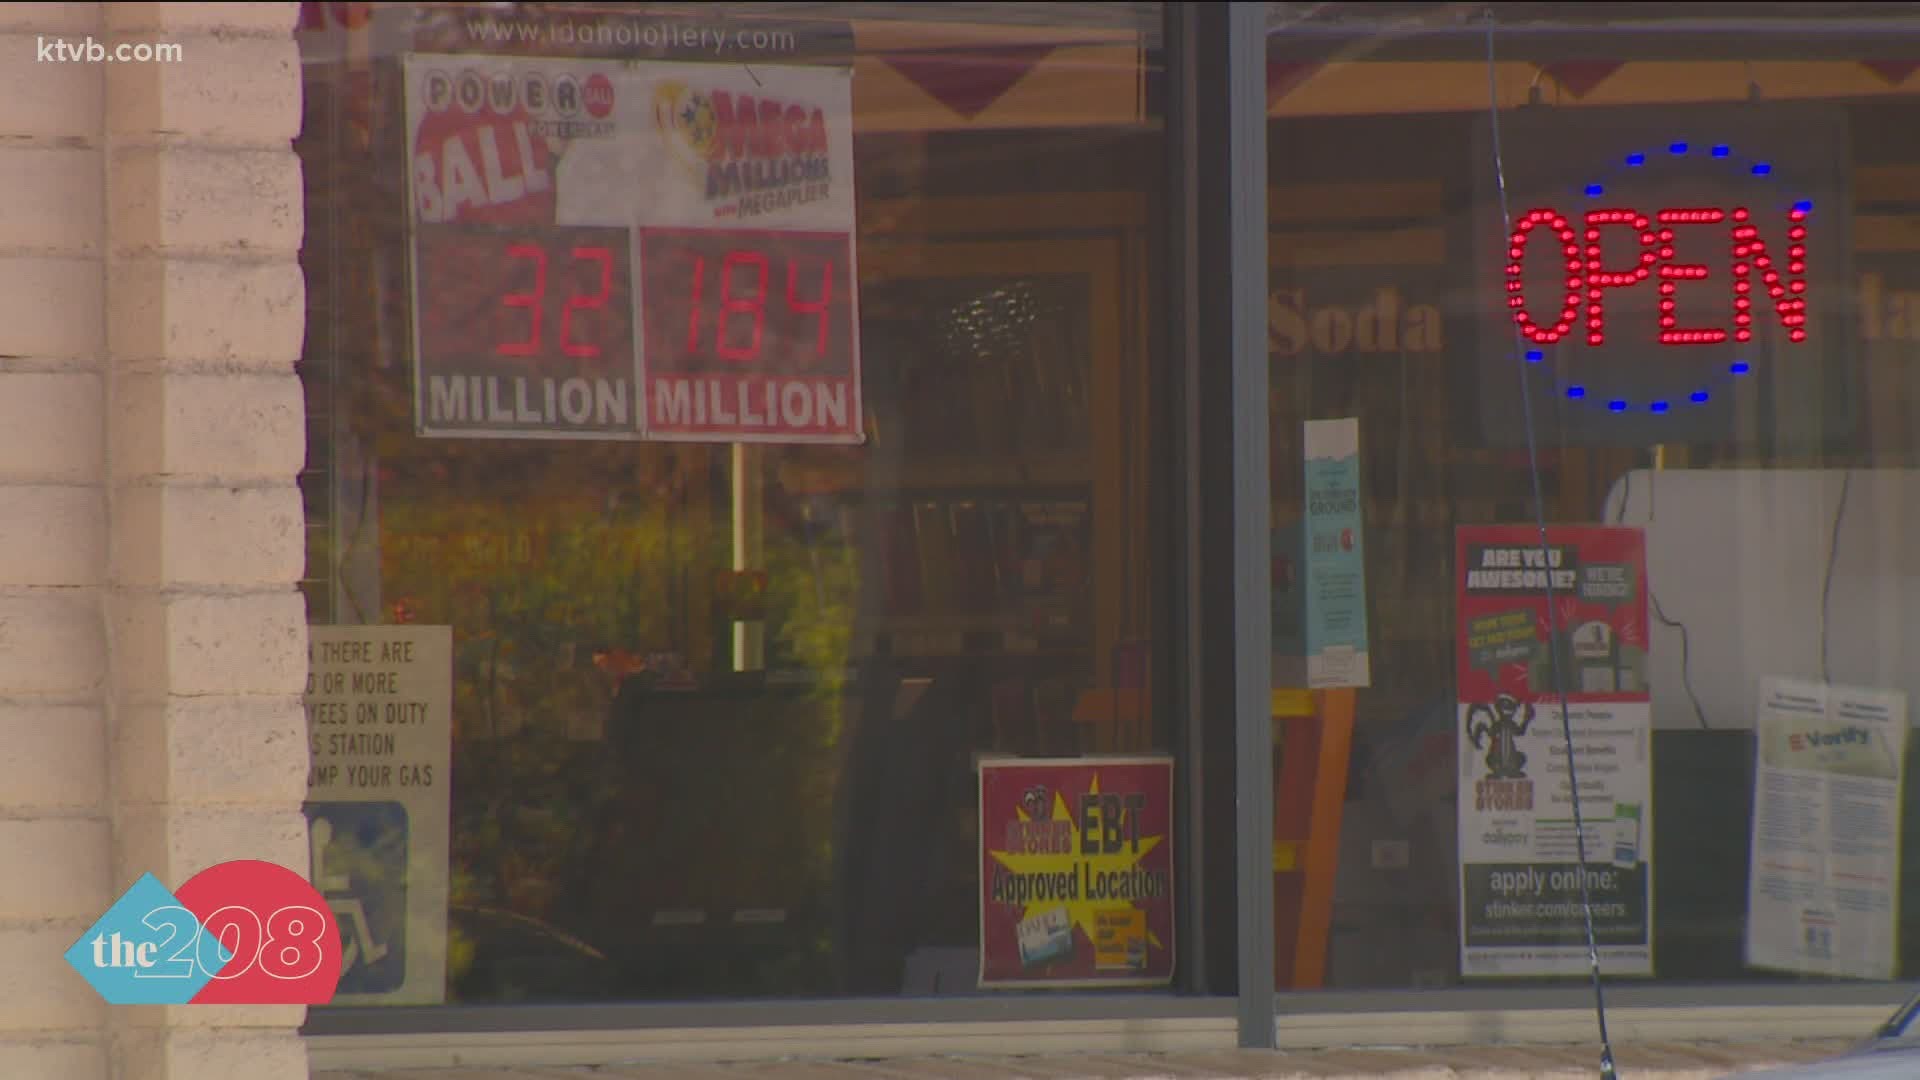 Store owners say the Powerball bring traffic into their stores and would be a huge loss if it goes away.